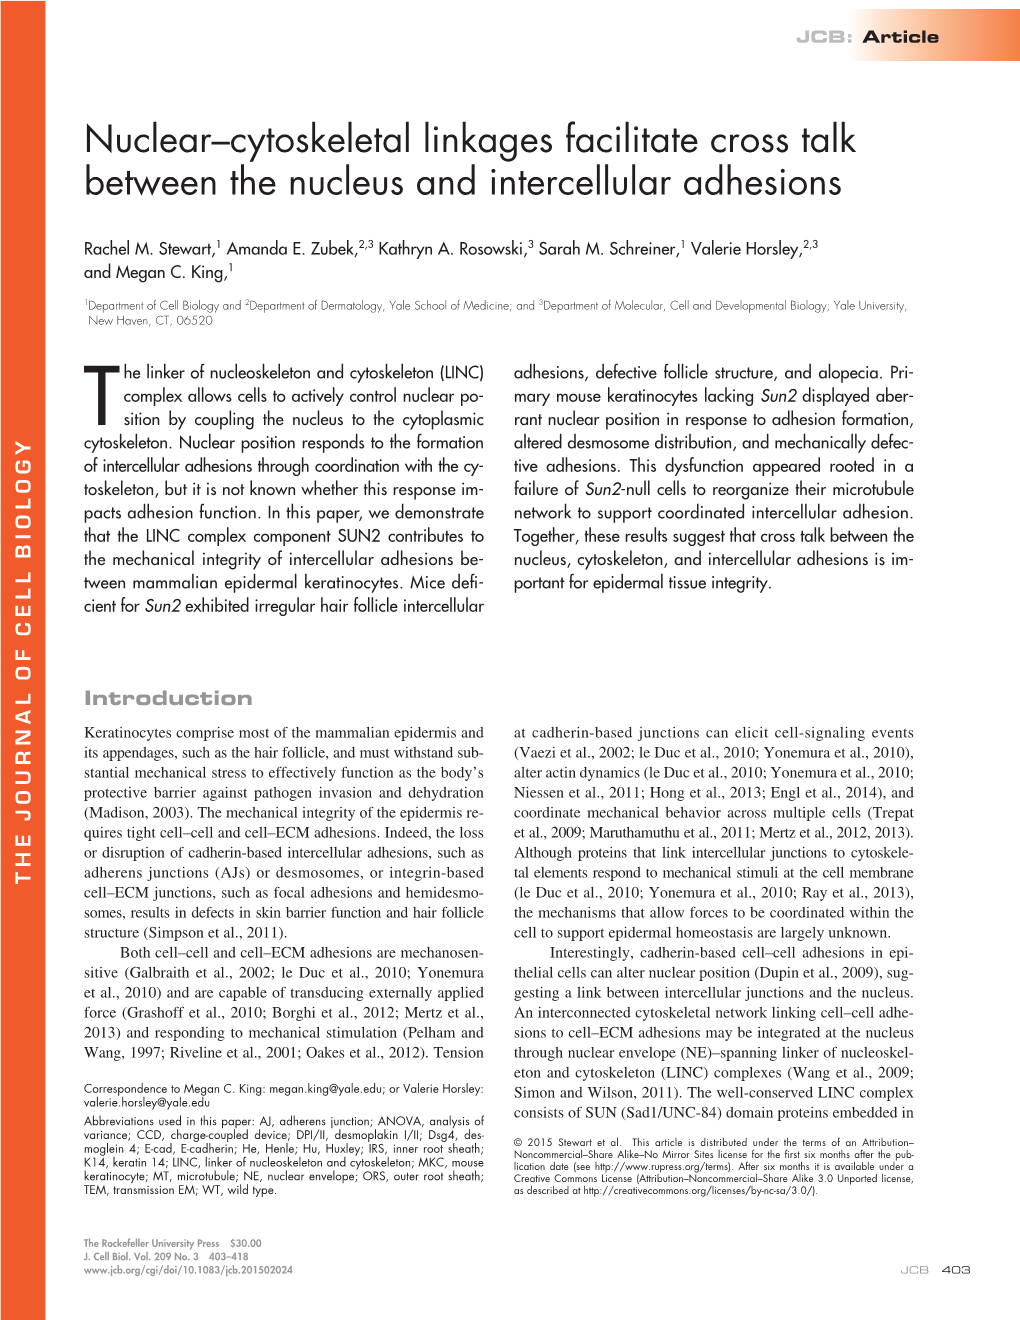 Nuclear–Cytoskeletal Linkages Facilitate Cross Talk Between the Nucleus and Intercellular Adhesions